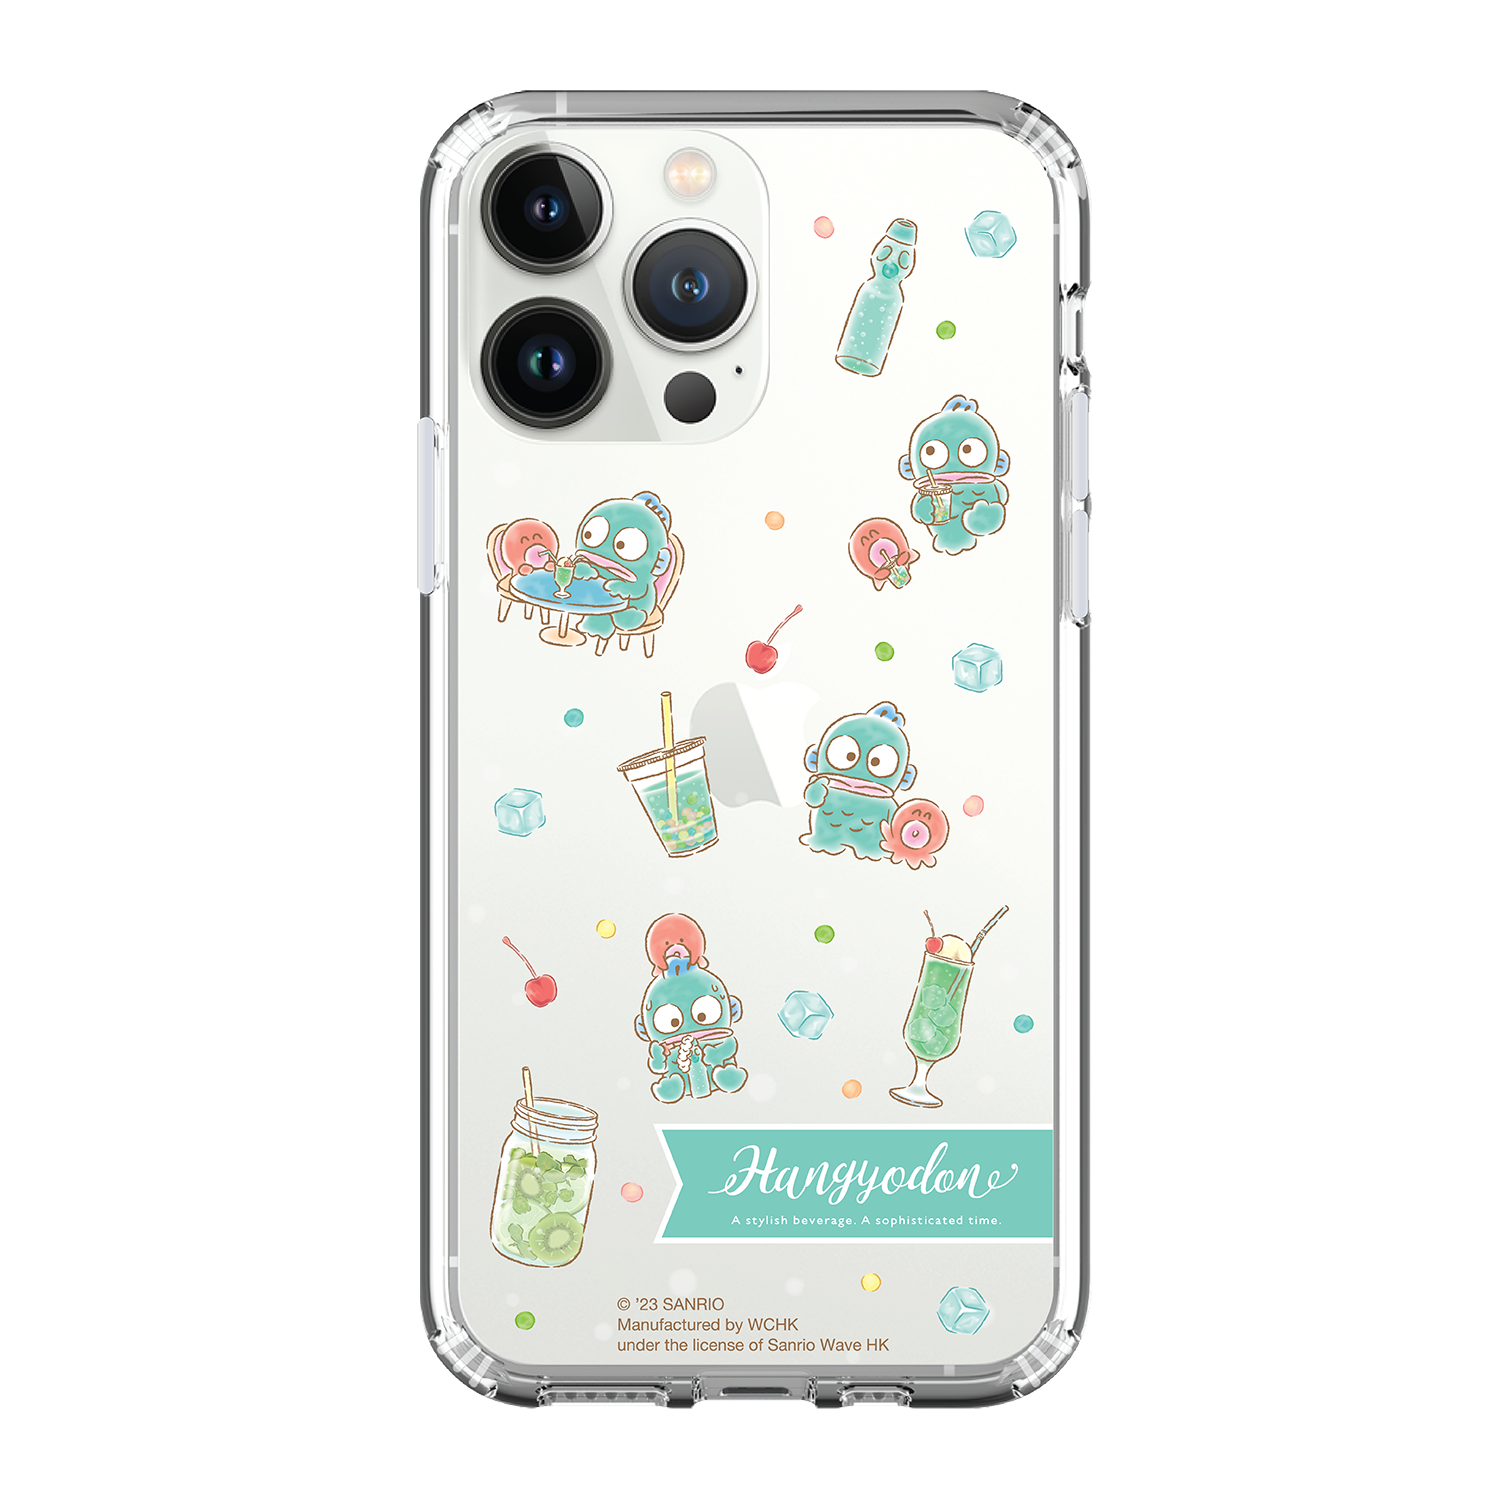 Han-GyoDon Clear Case / iPhone Case / Android Case / Samsung Case 防撞透明手機殼 (HG98)